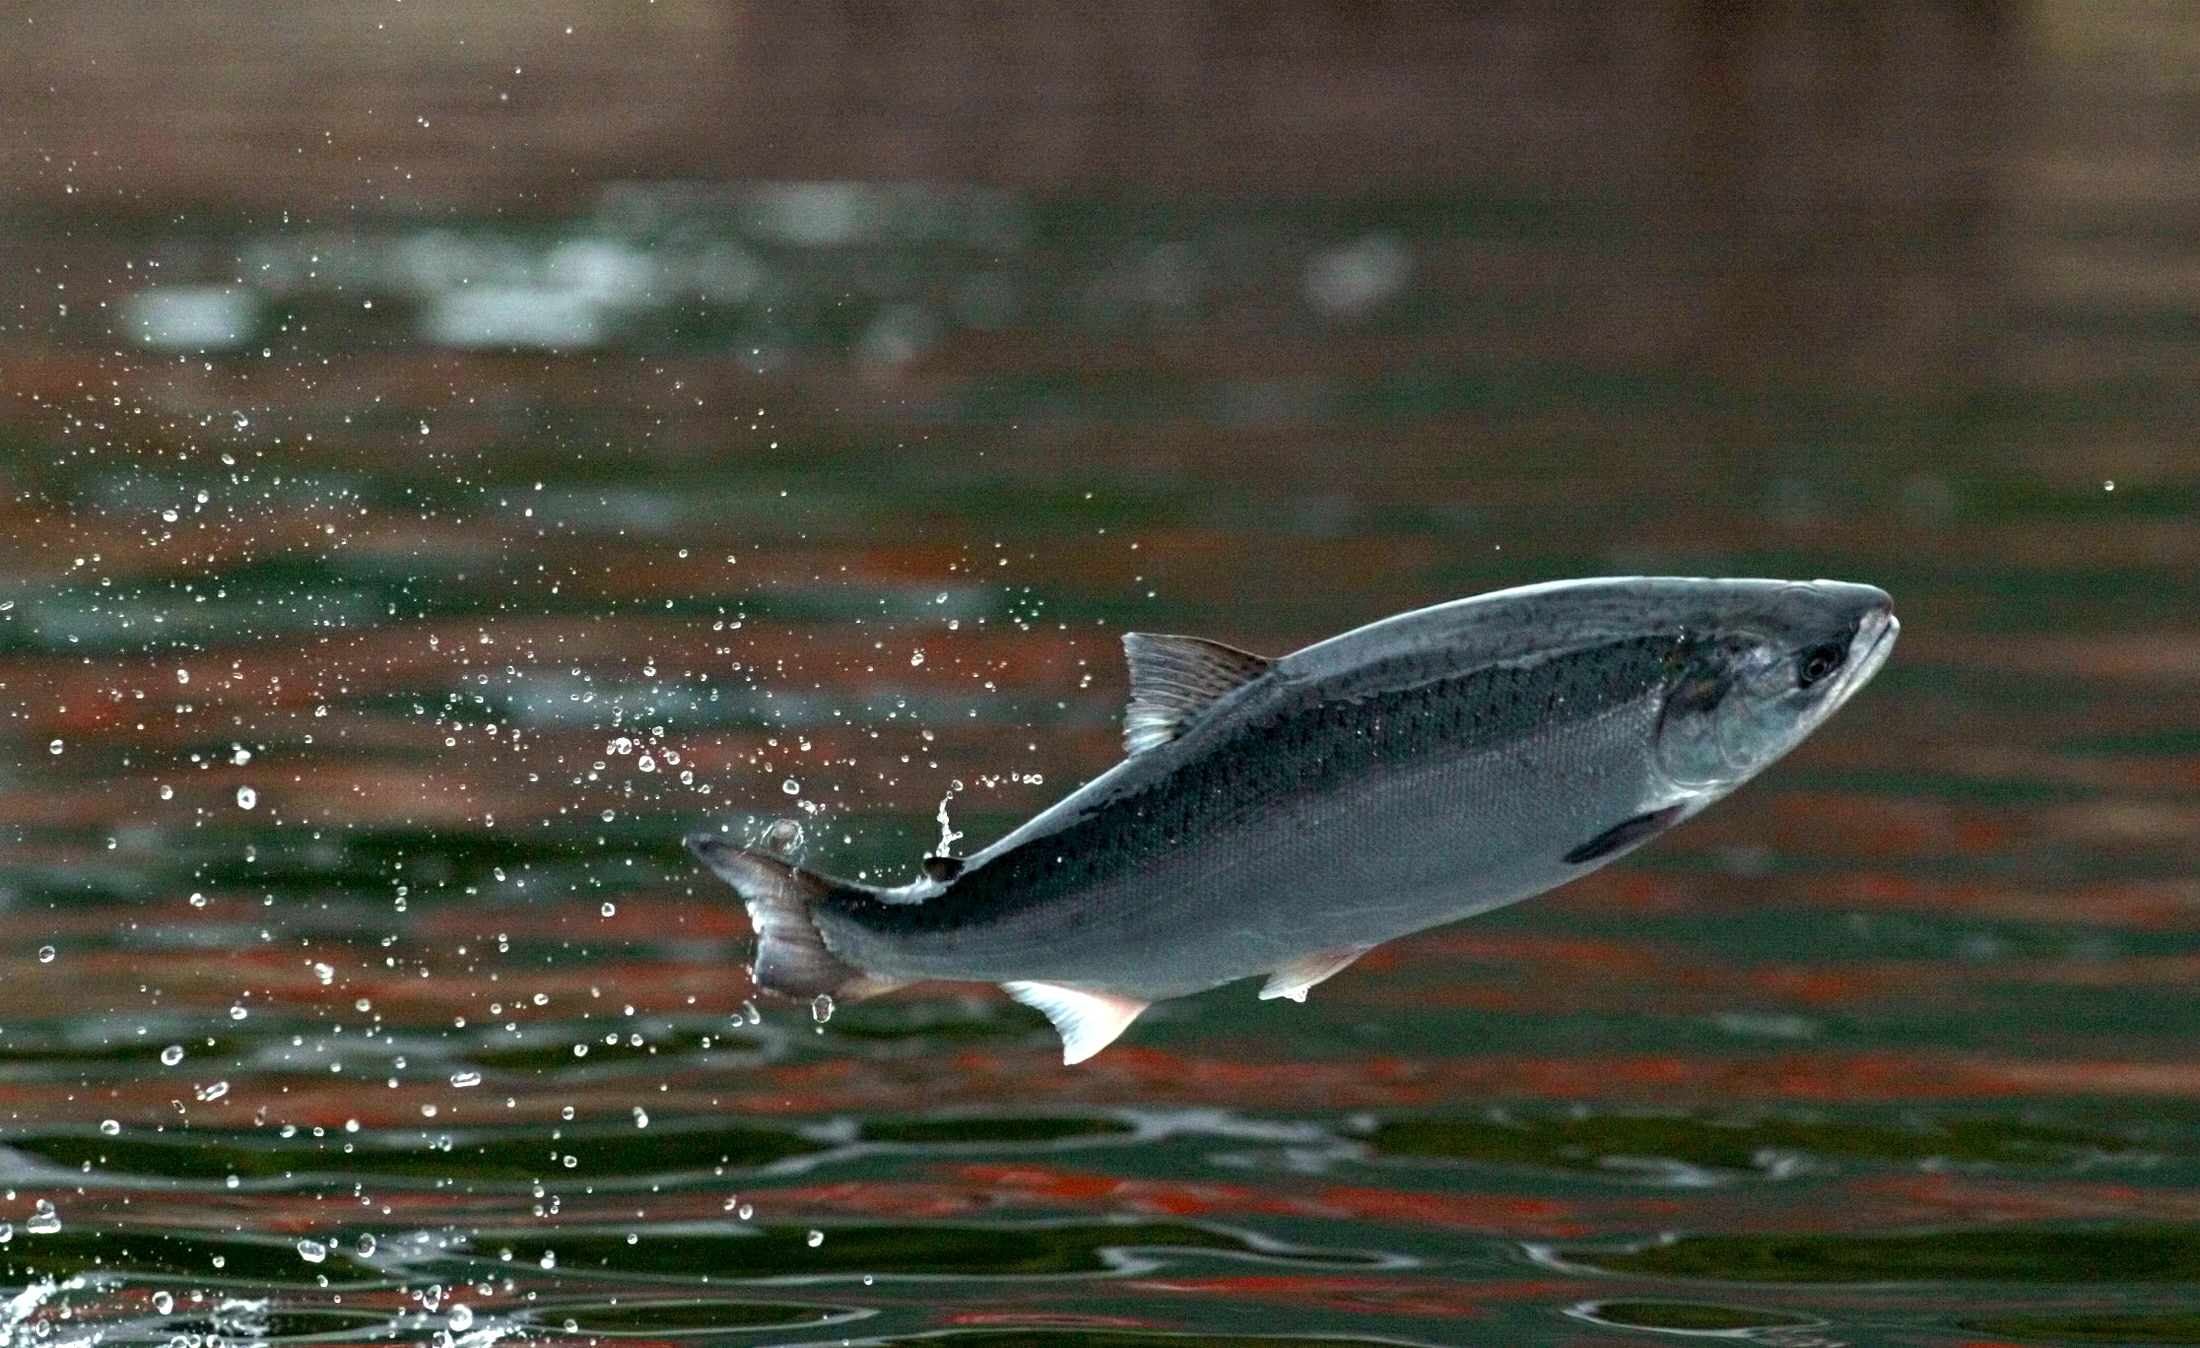 SALMON JUMP FOR FOOD AT FARM IN SOUTHERN CHILE.